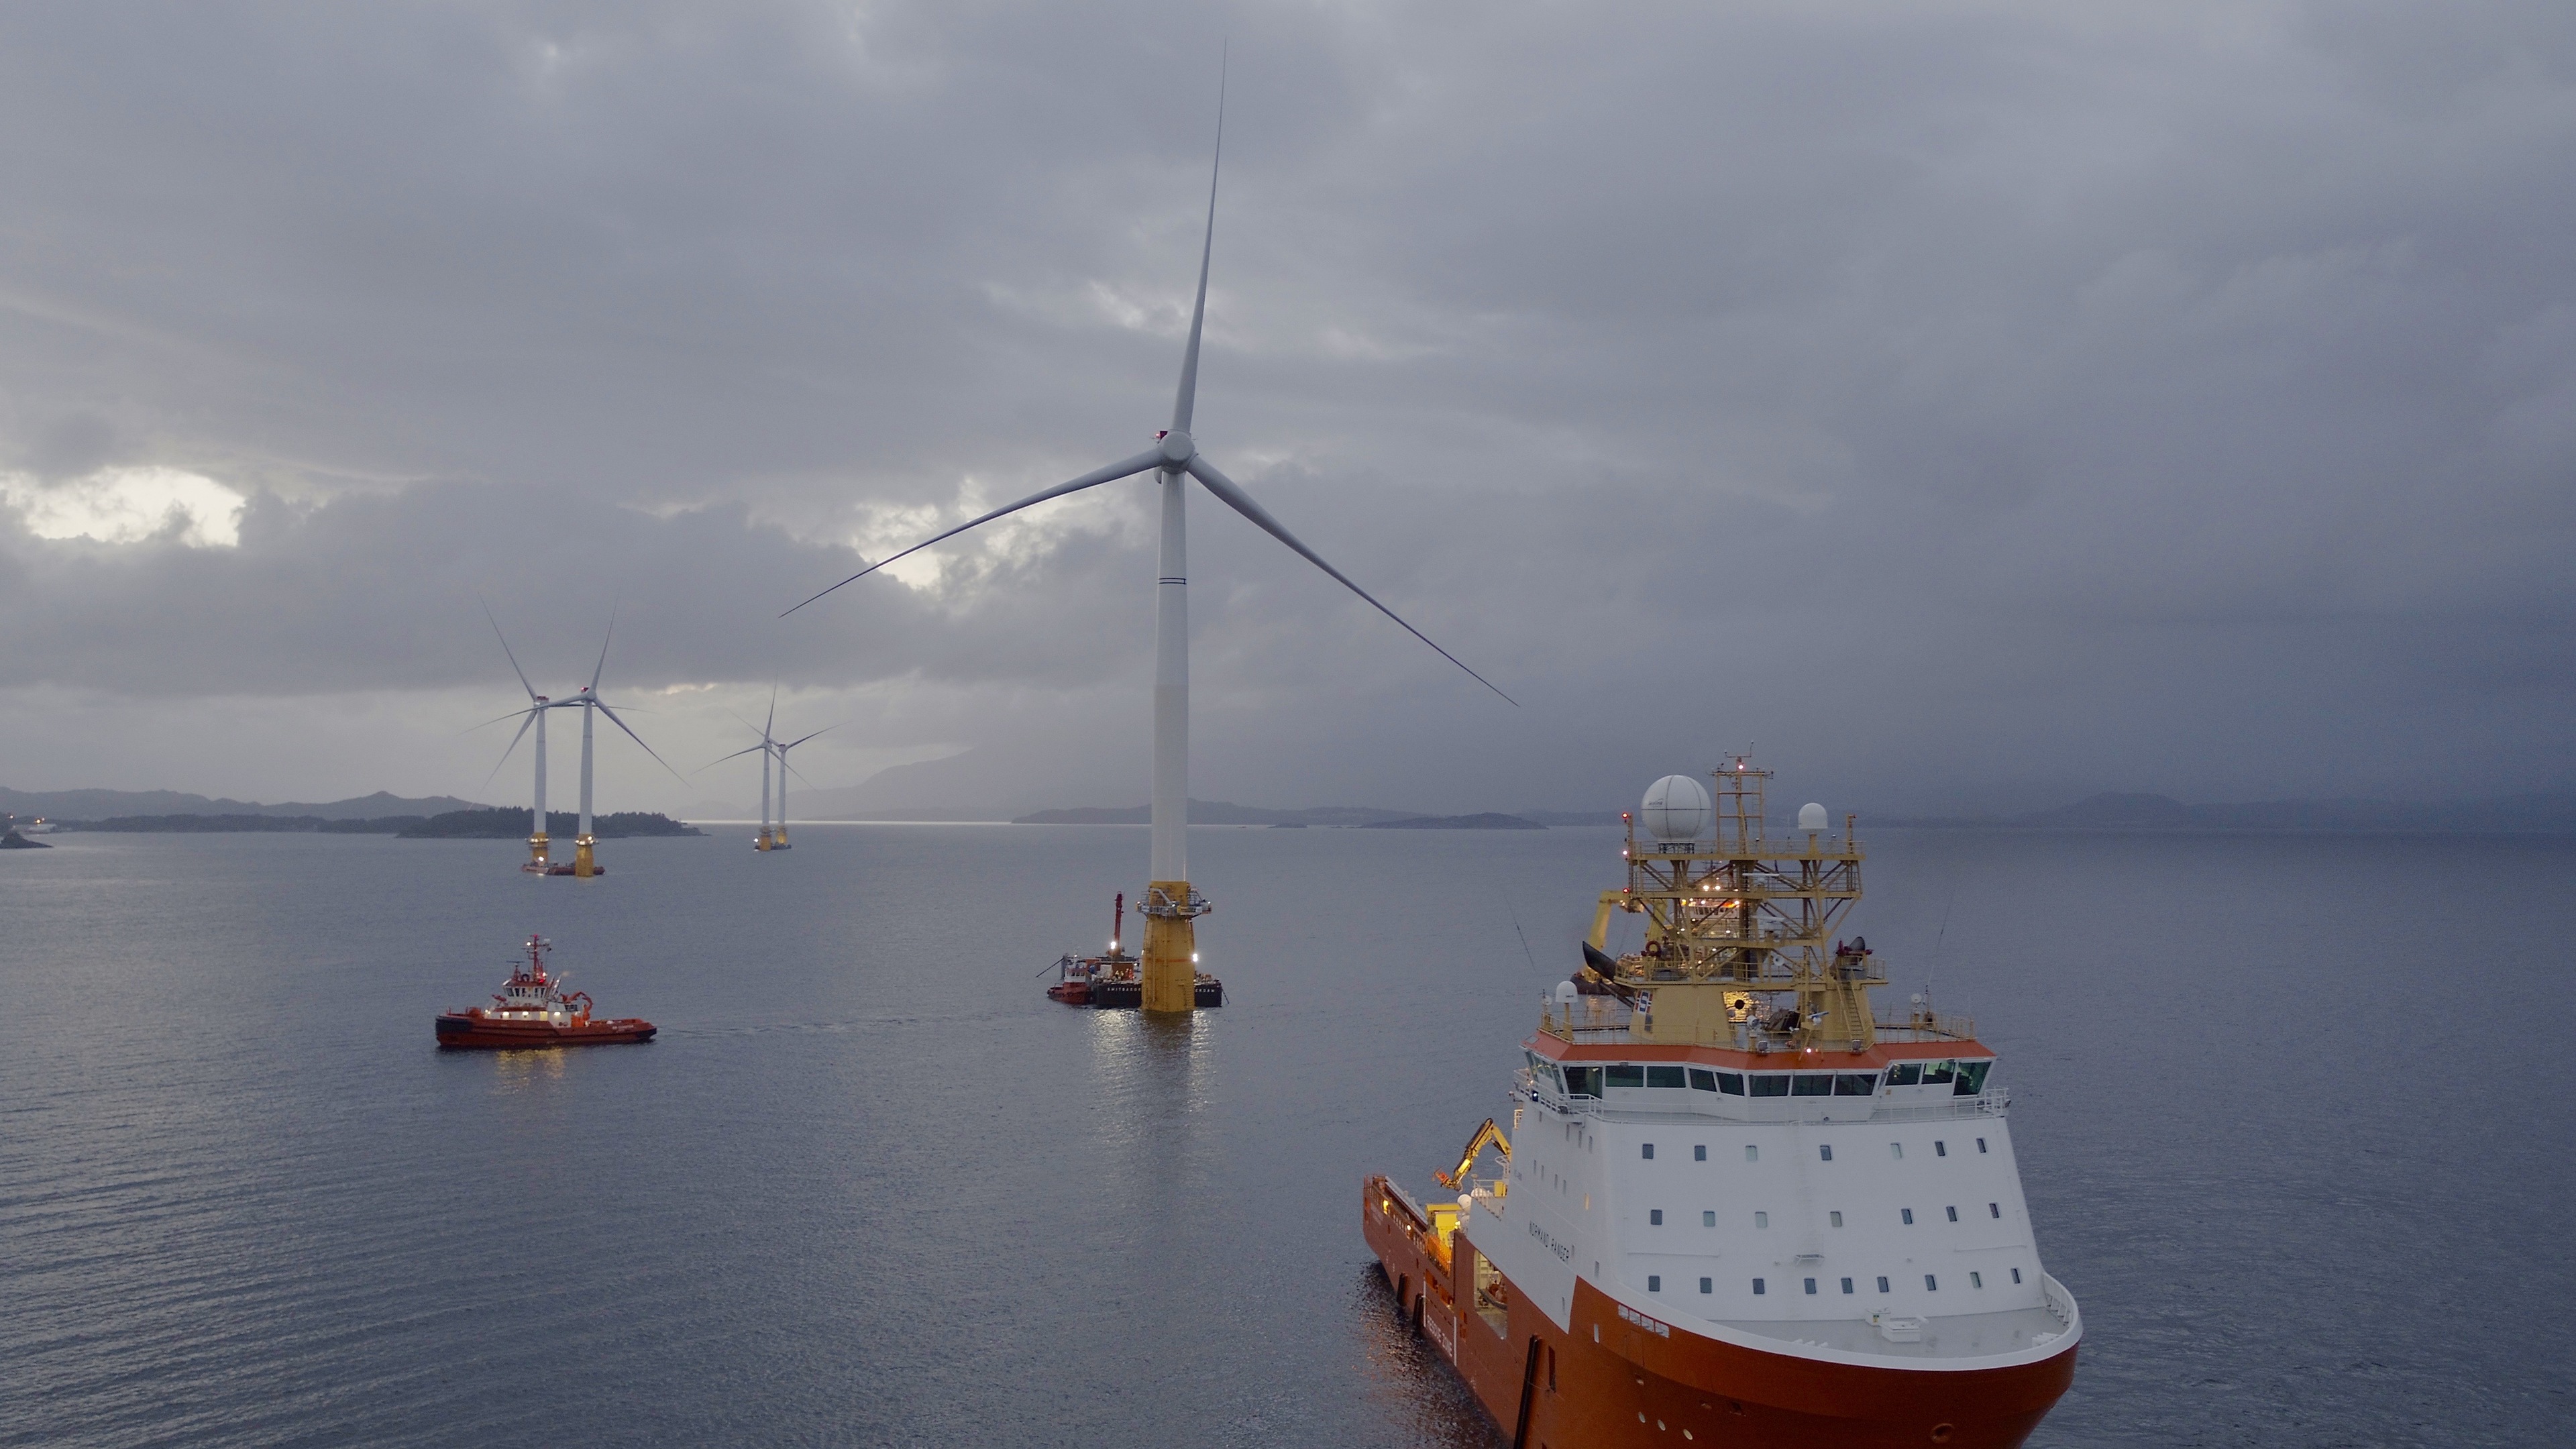 The report covers the work of various operators including SSE, Vattenfall and Equinor